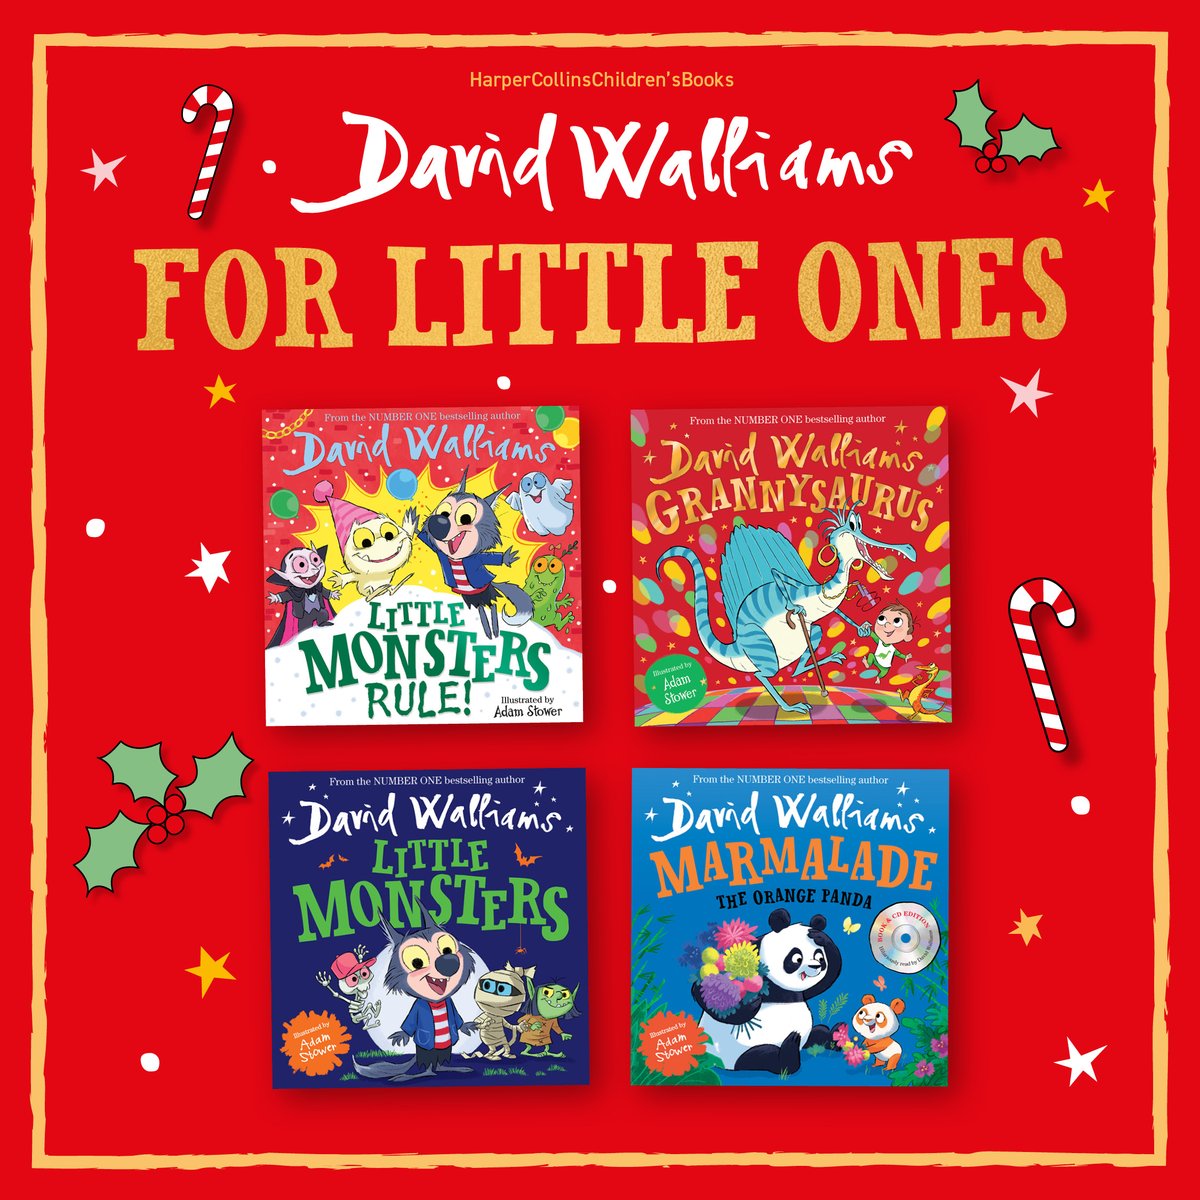 🎁 Holly Jolly Reads – Gift Guides 🎁 🎄 9-12s – Spaceboy, The Blunders, Gangsta Granny Strikes Again 🌟 7-11s – Robodog, Megamonster, Slime ❄️ Little Ones – Little Monsters, Little Monsters Rule, Grannysaurus, Marmalade ✨ Browse @davidwalliams' shop: amzn.to/3R8QVFZ